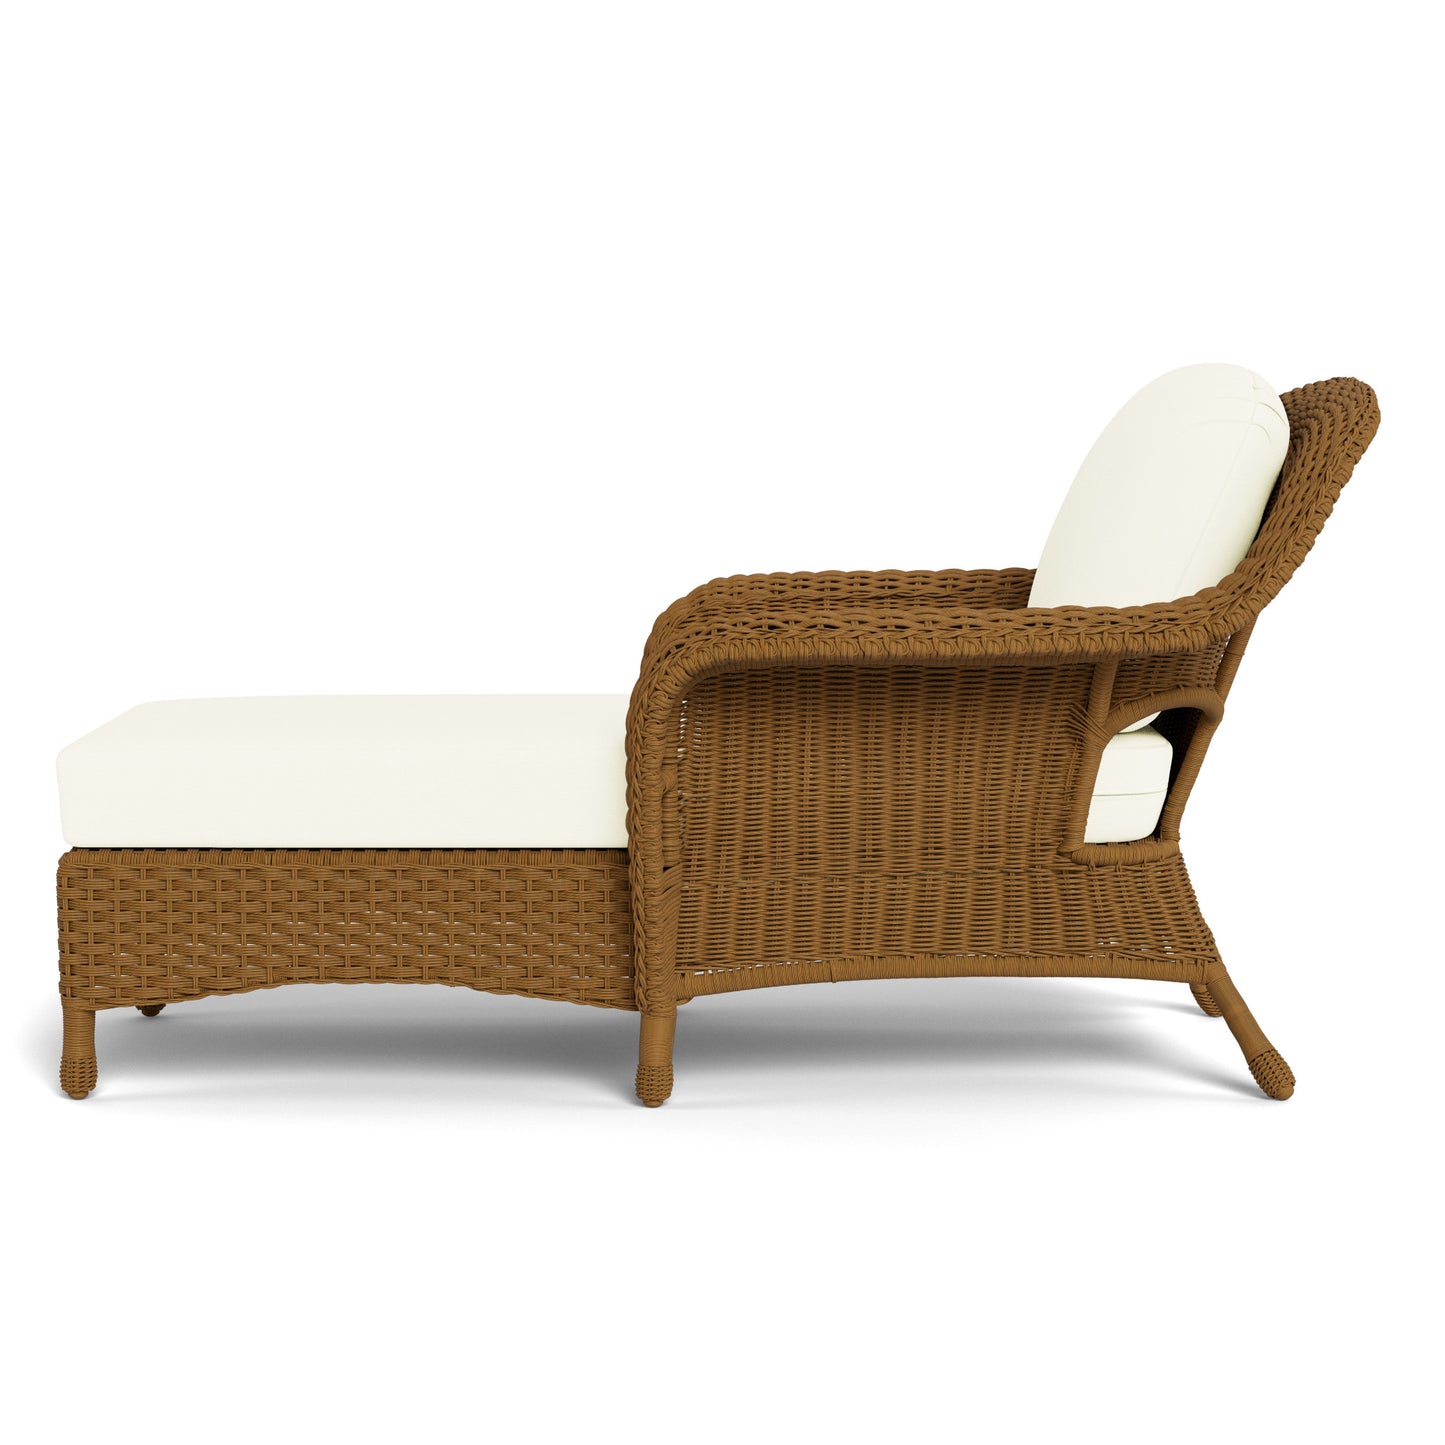 Sea Pines Chaise Lounge - Mojave - Canvas Natural